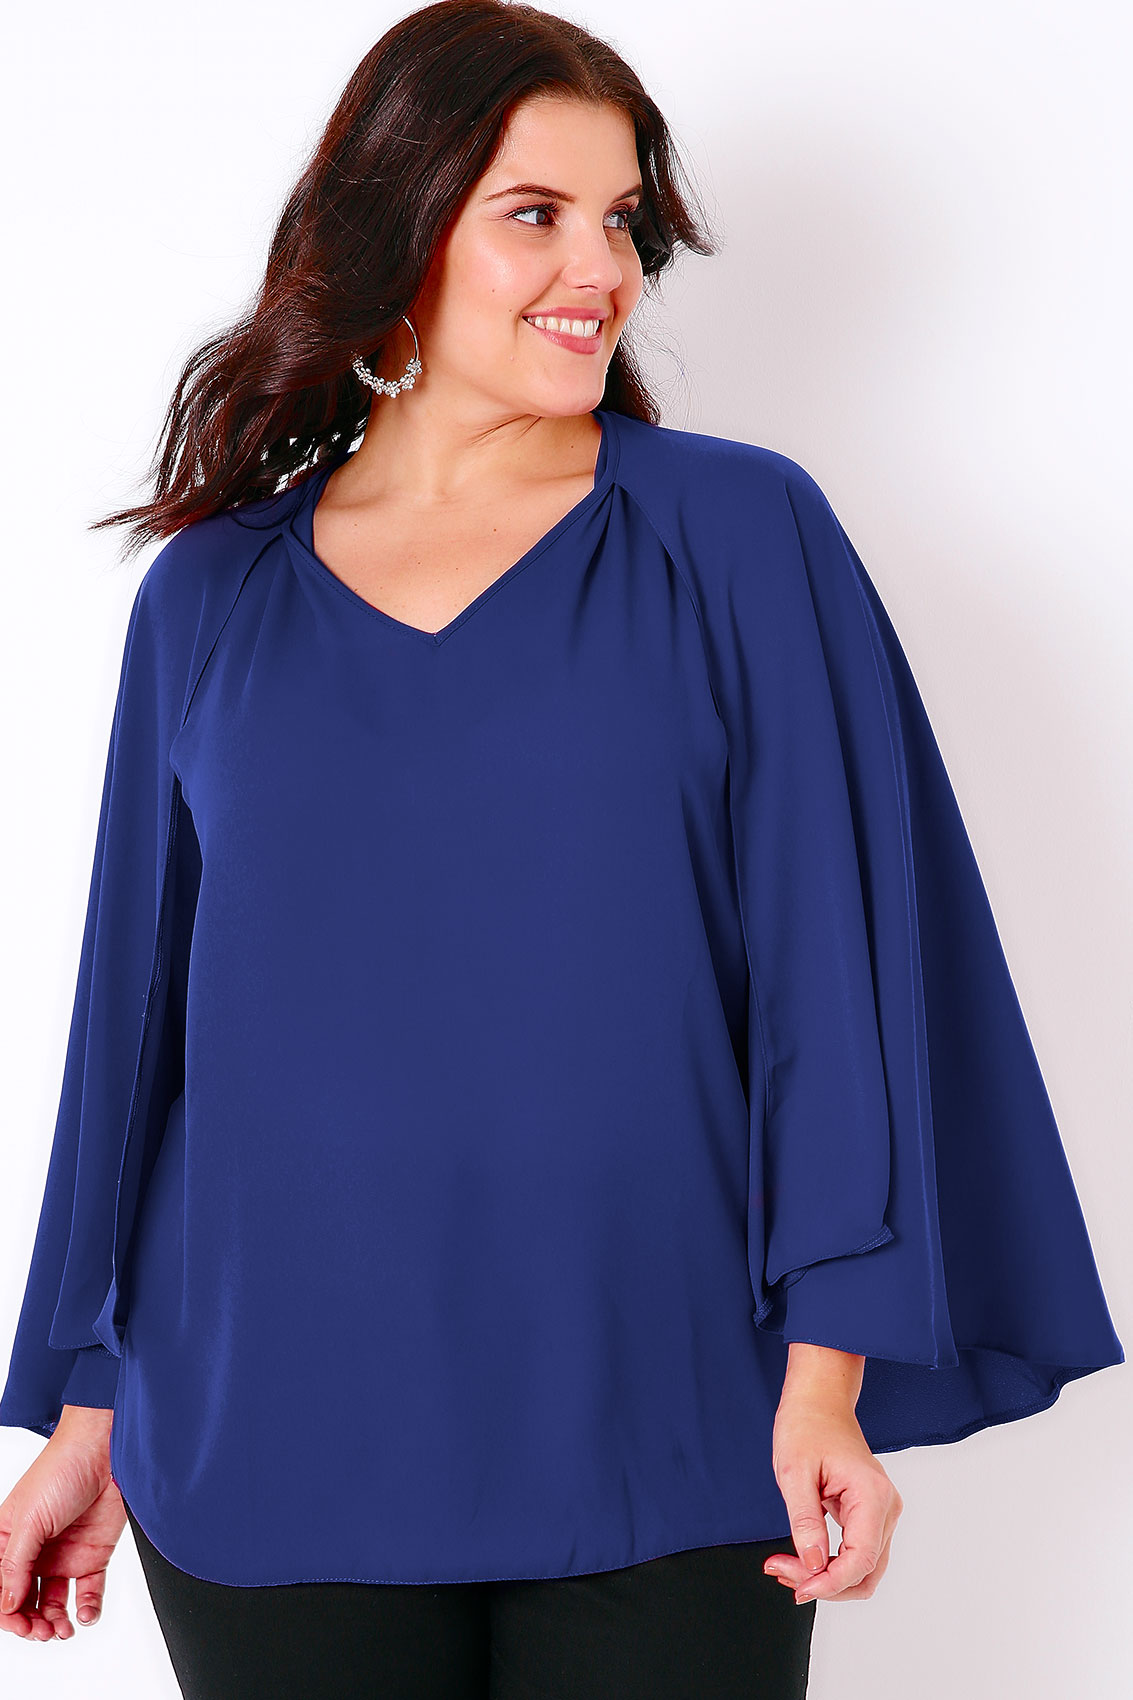 Blue Woven Sleeveless Top With V-Neck & Cape Detail, Plus Size 16 to 32